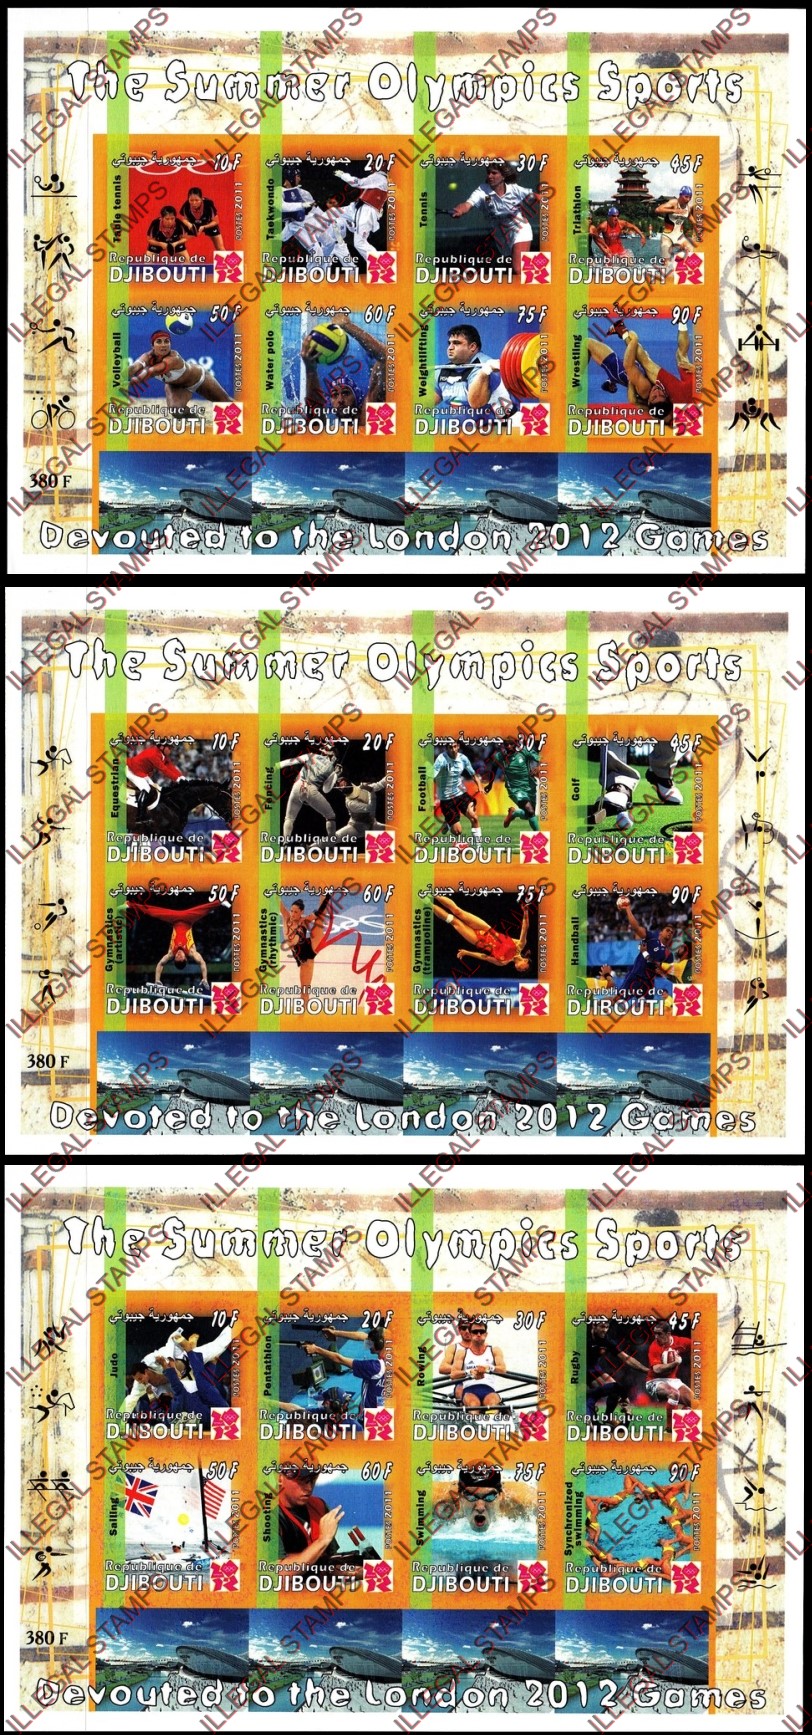 Djibouti 2011 Summer Olympic Games Illegal Stamp Sheetlets of 8